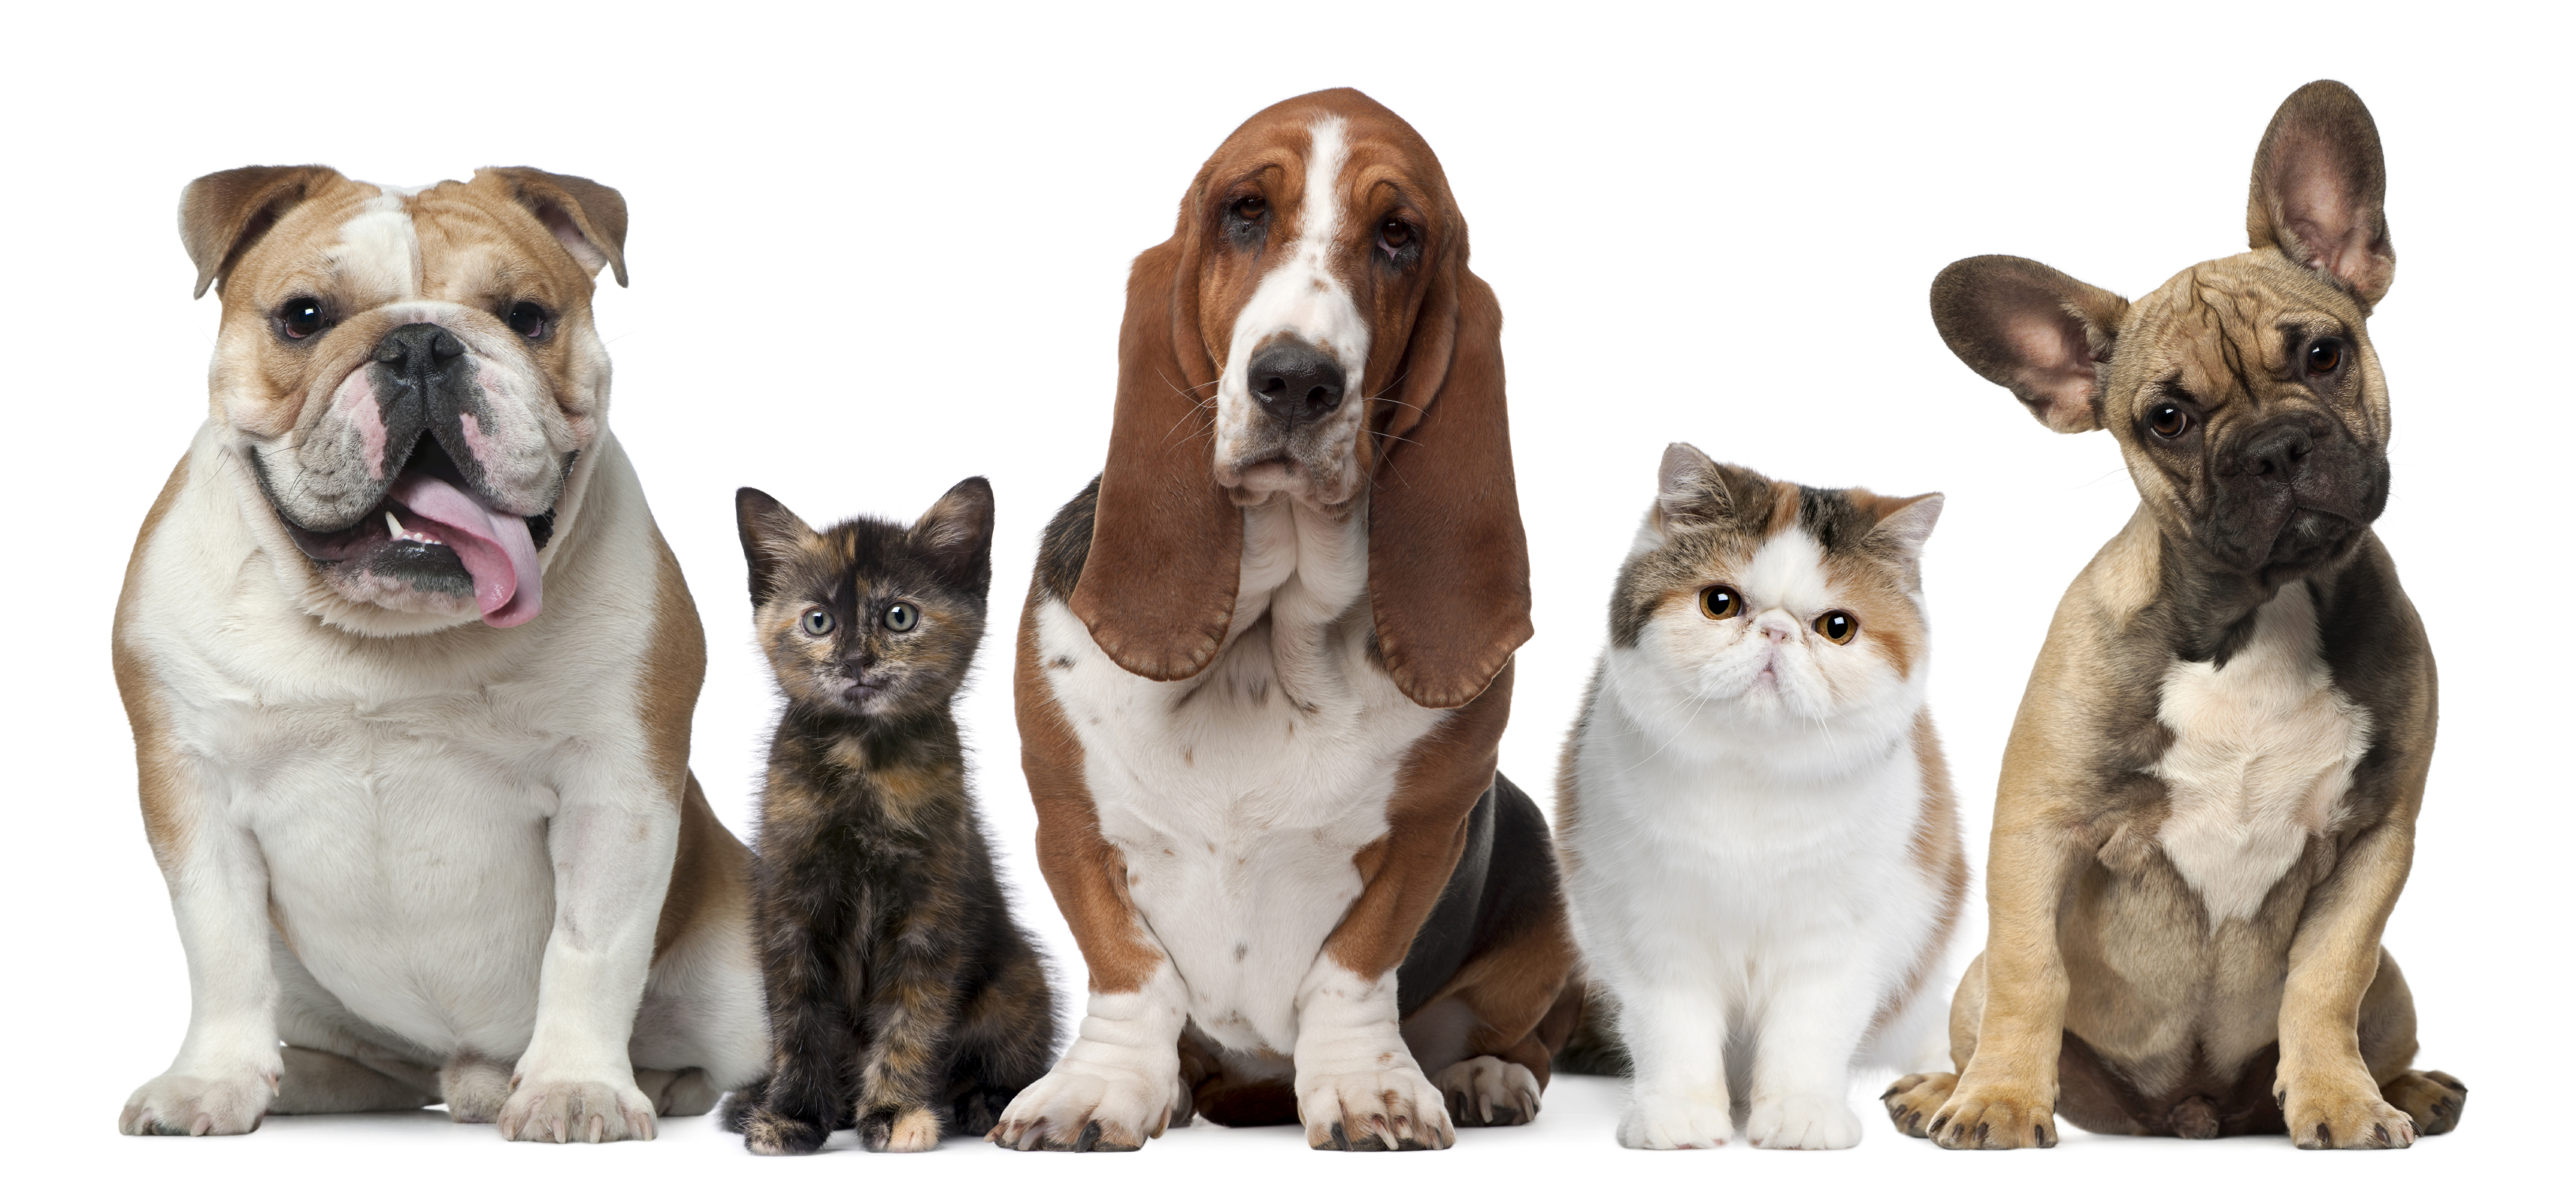 Dogs-and-Cats-in-a-Row-Large.jpg